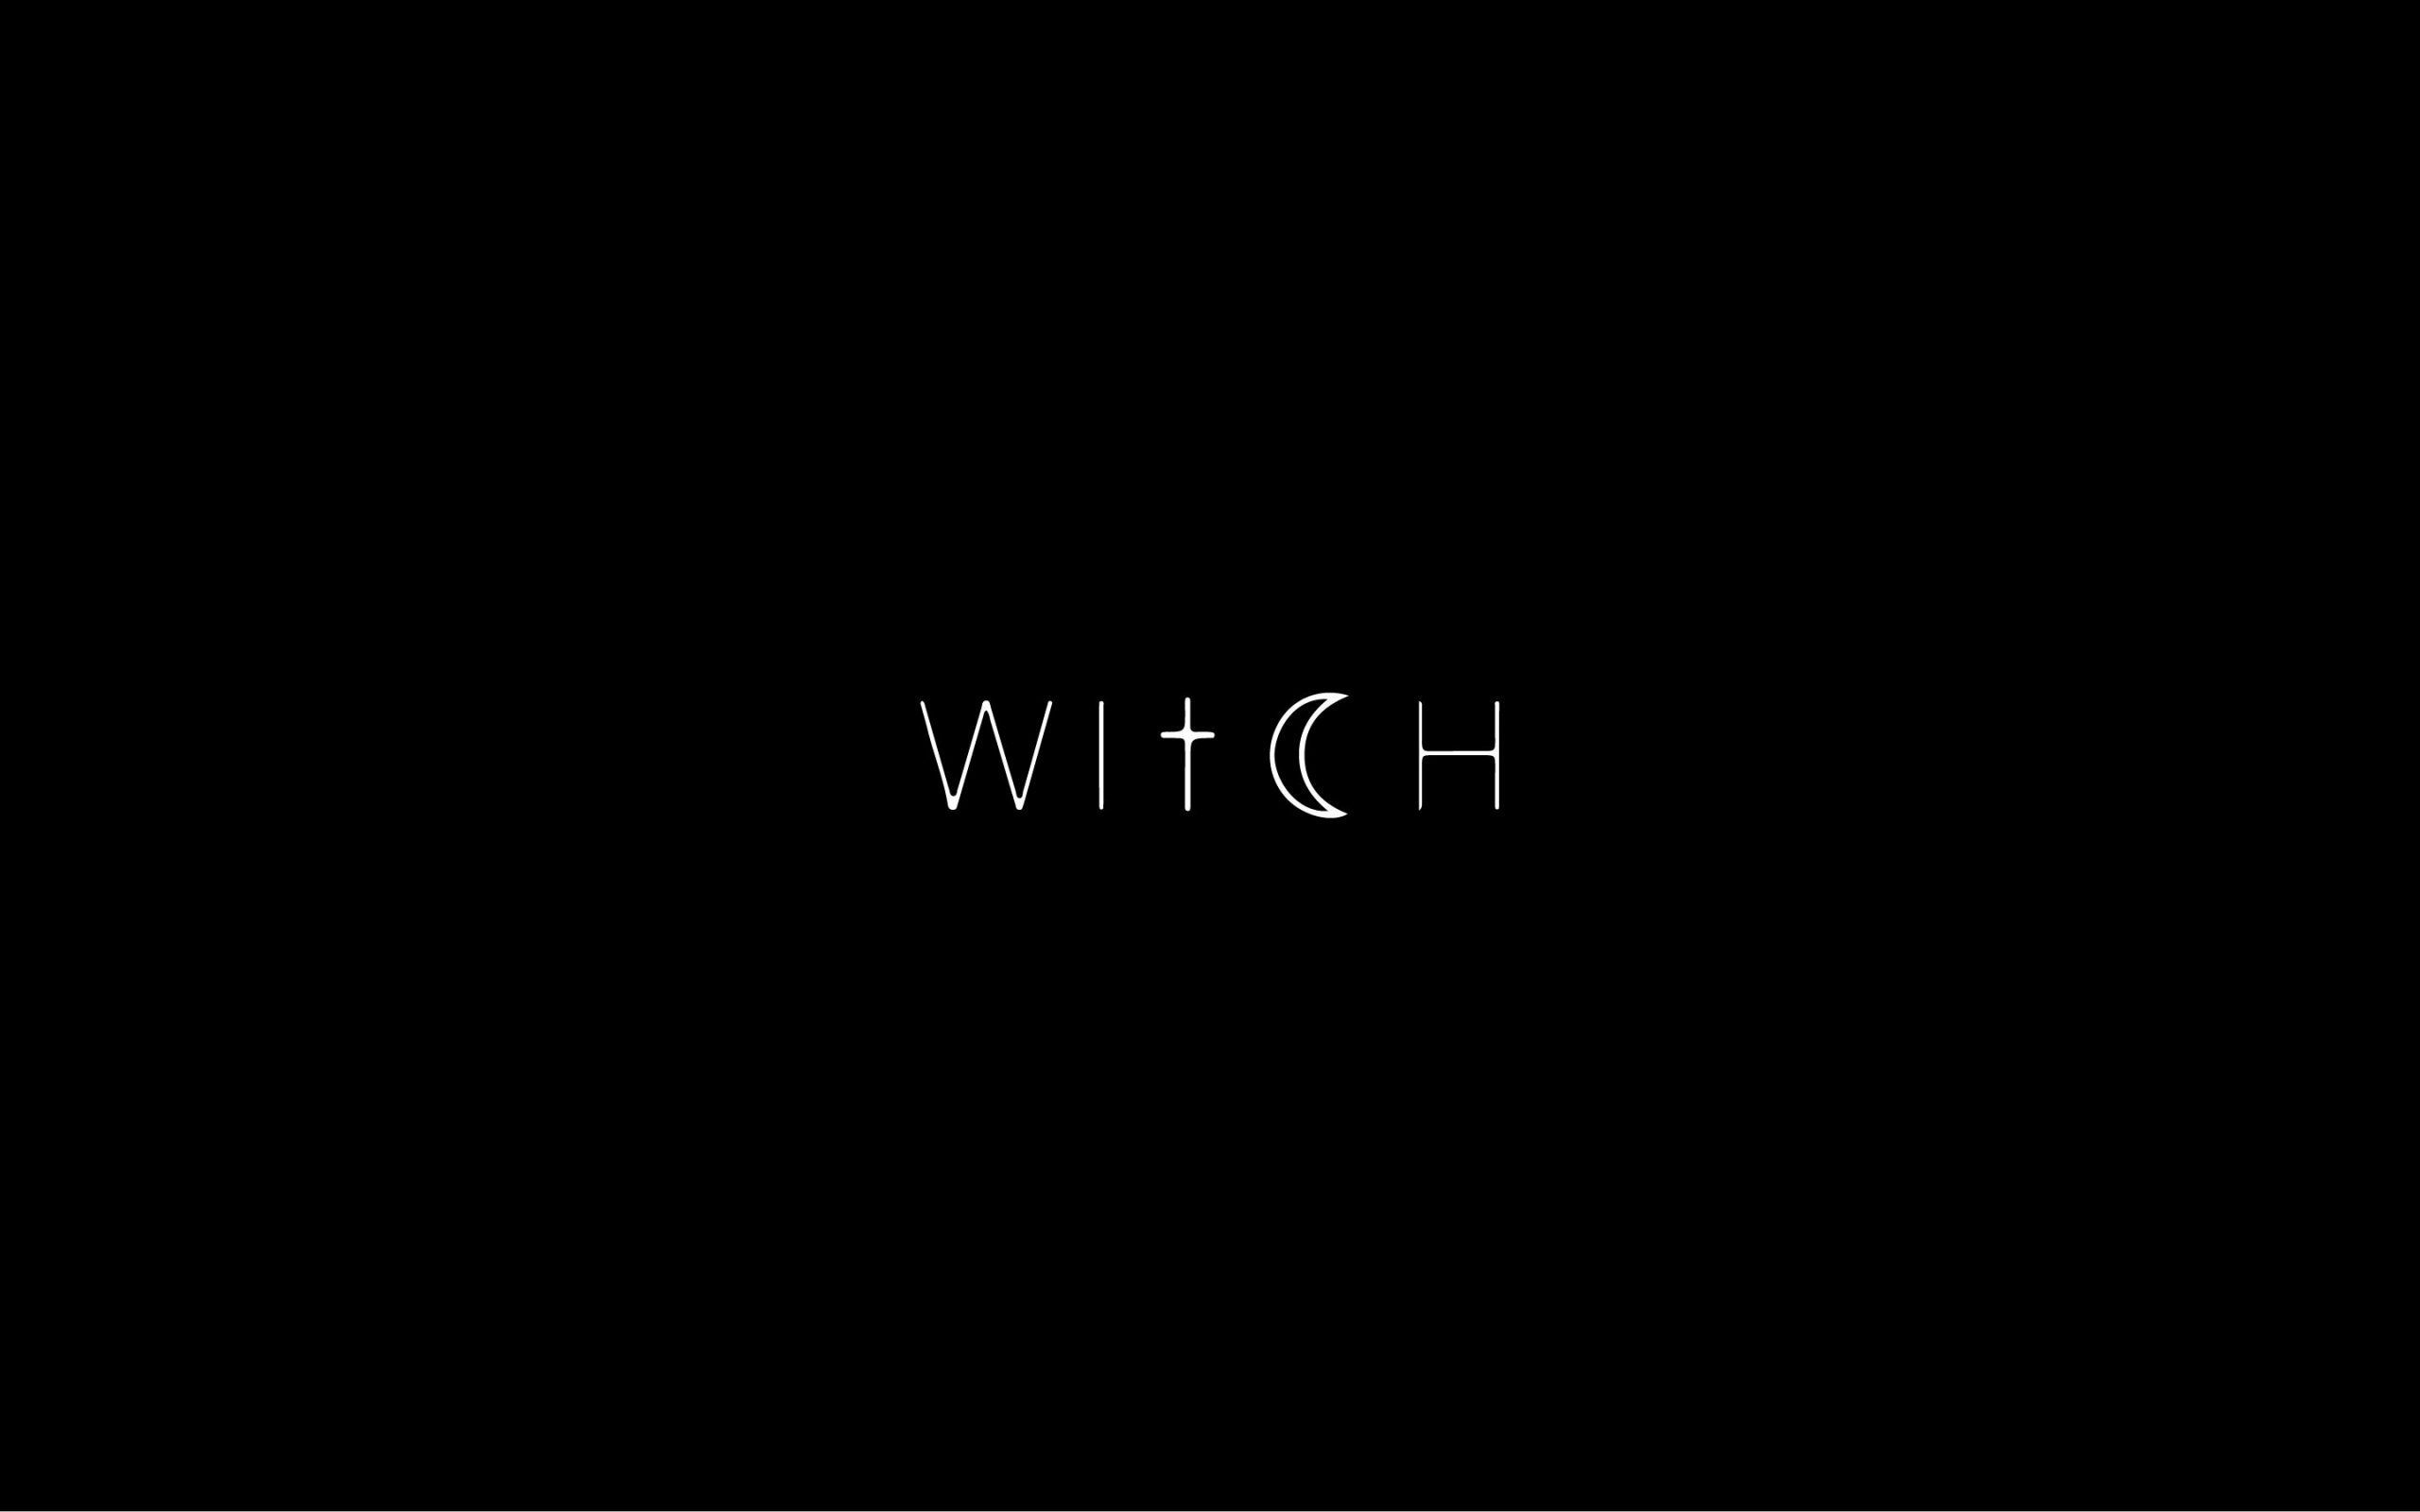 Witch Aesthetic Desktop Wallpaper Free Witch Aesthetic Desktop Background